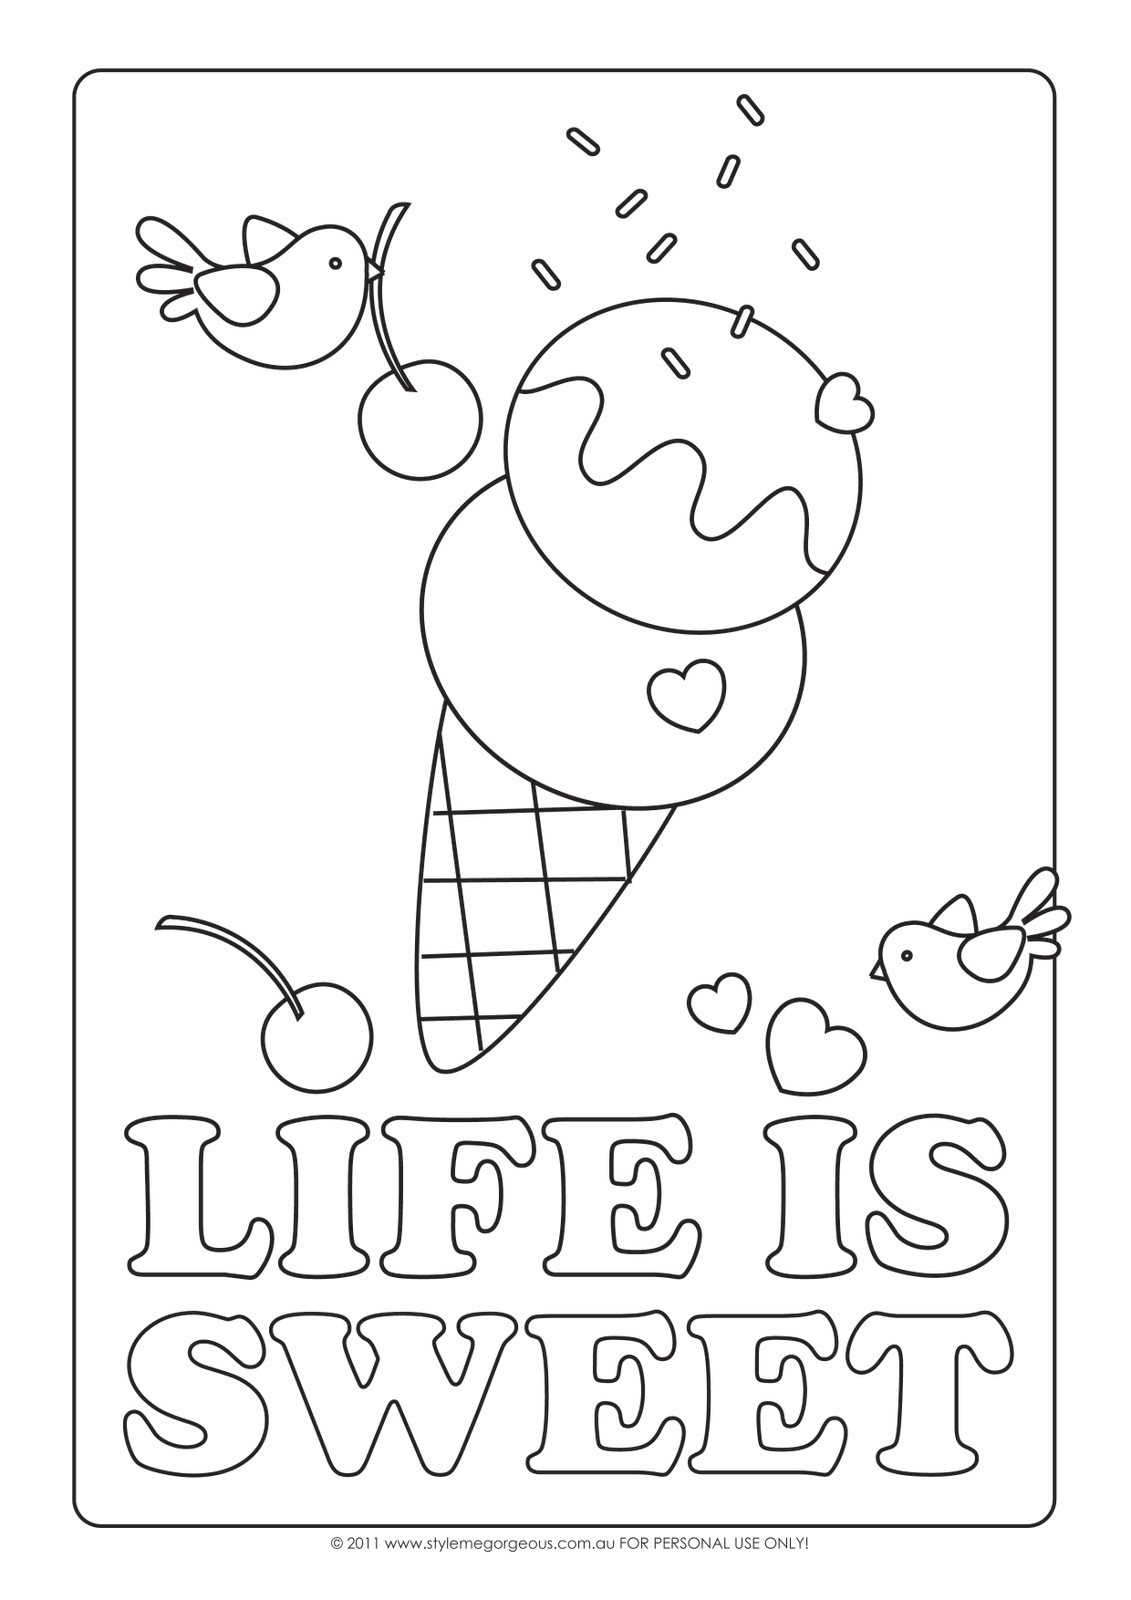 Coloring Pages Ice Cream
 Coloring Pages for Kids Ice Cream Coloring Pages